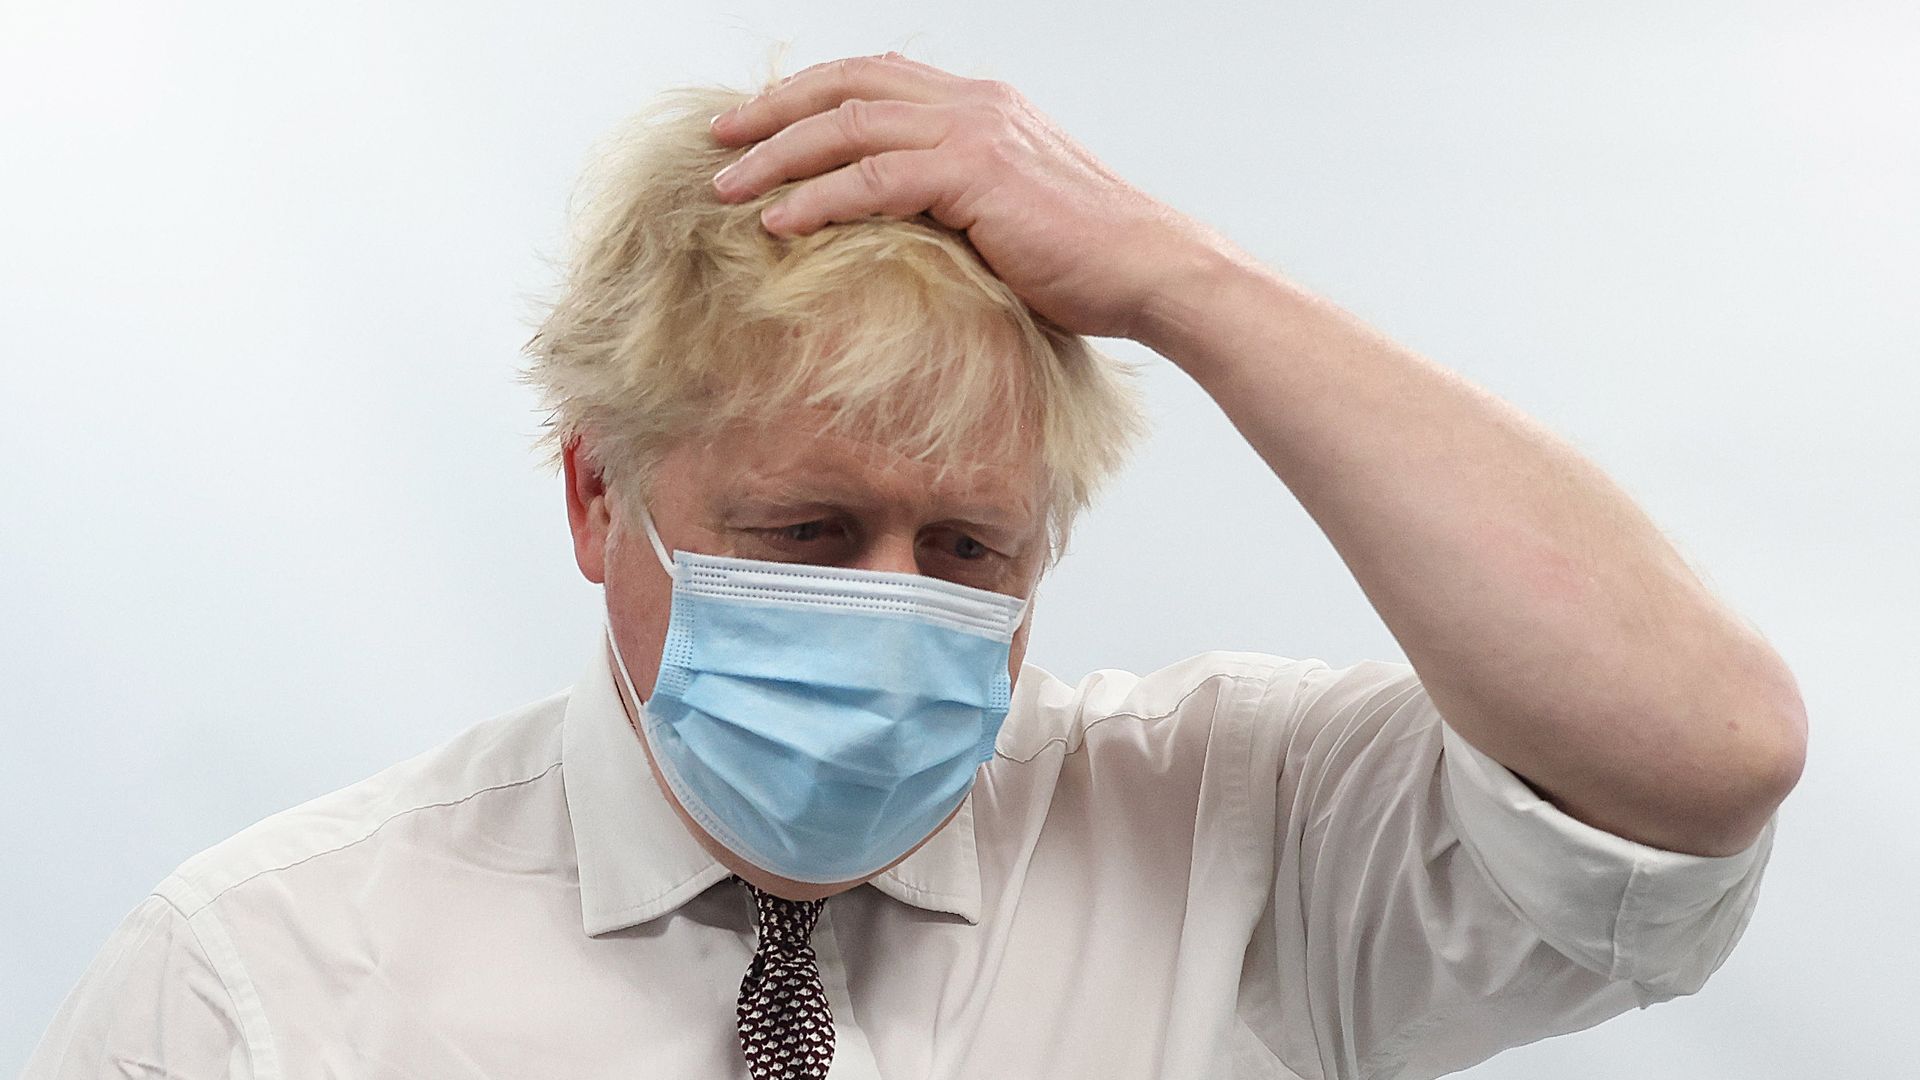 British Prime Minister Boris Johnson gestures as he visits Finchley Memorial Hospital in North London on January 18.